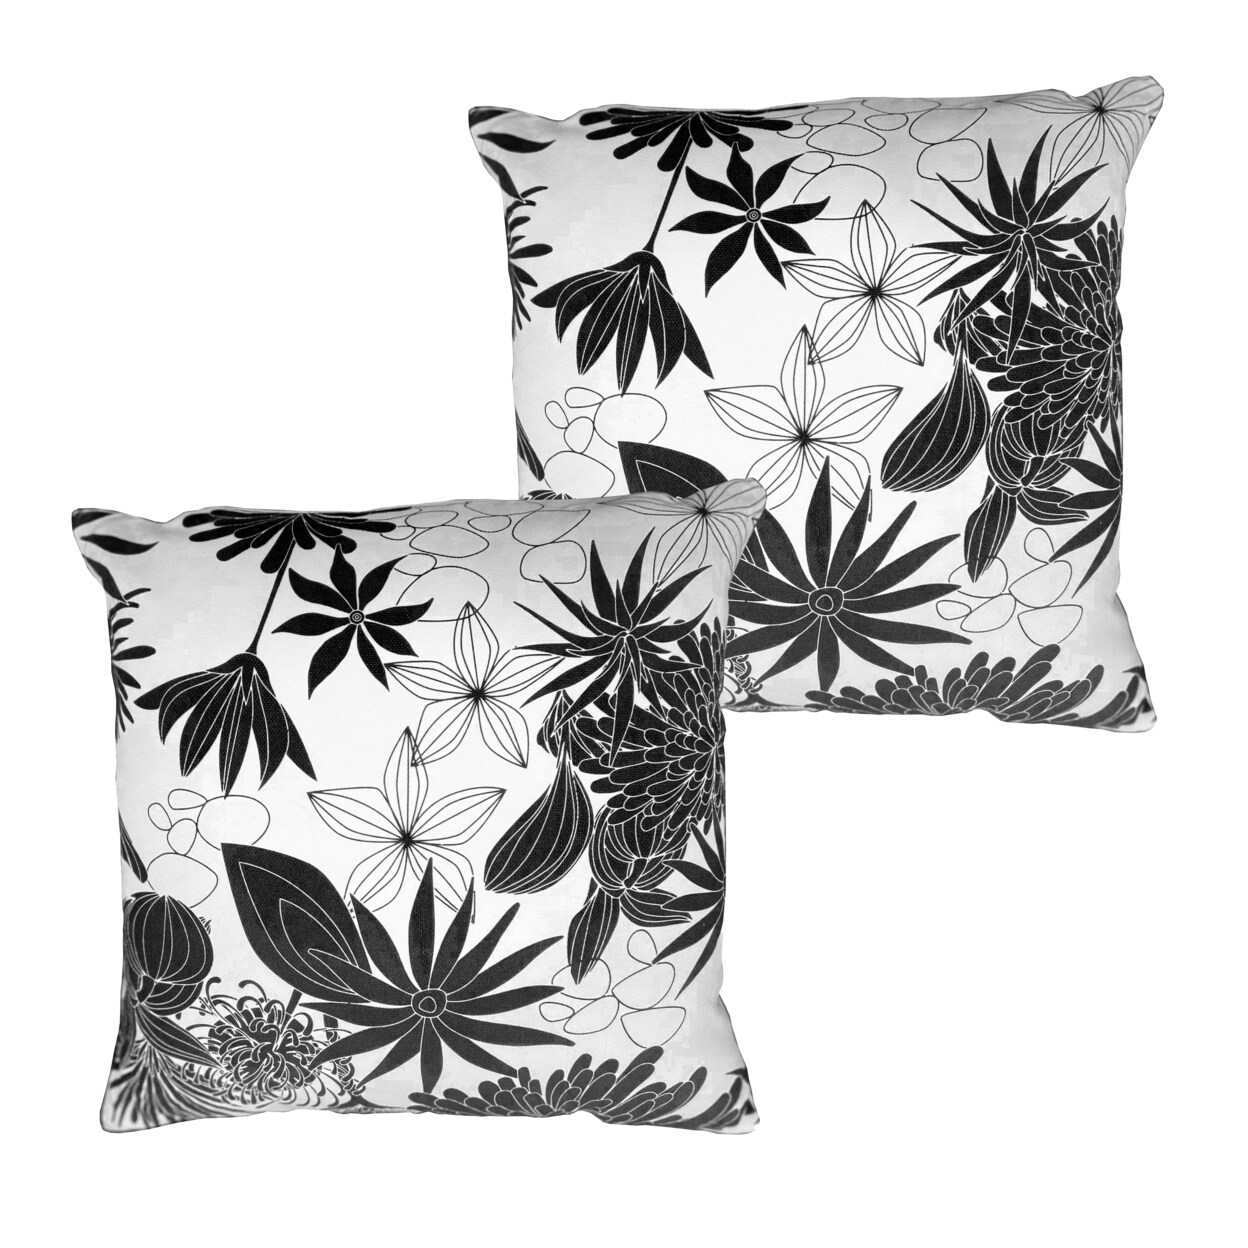 Vintage Floral Collection Decorative Accent Throw Pillows - Set of 2